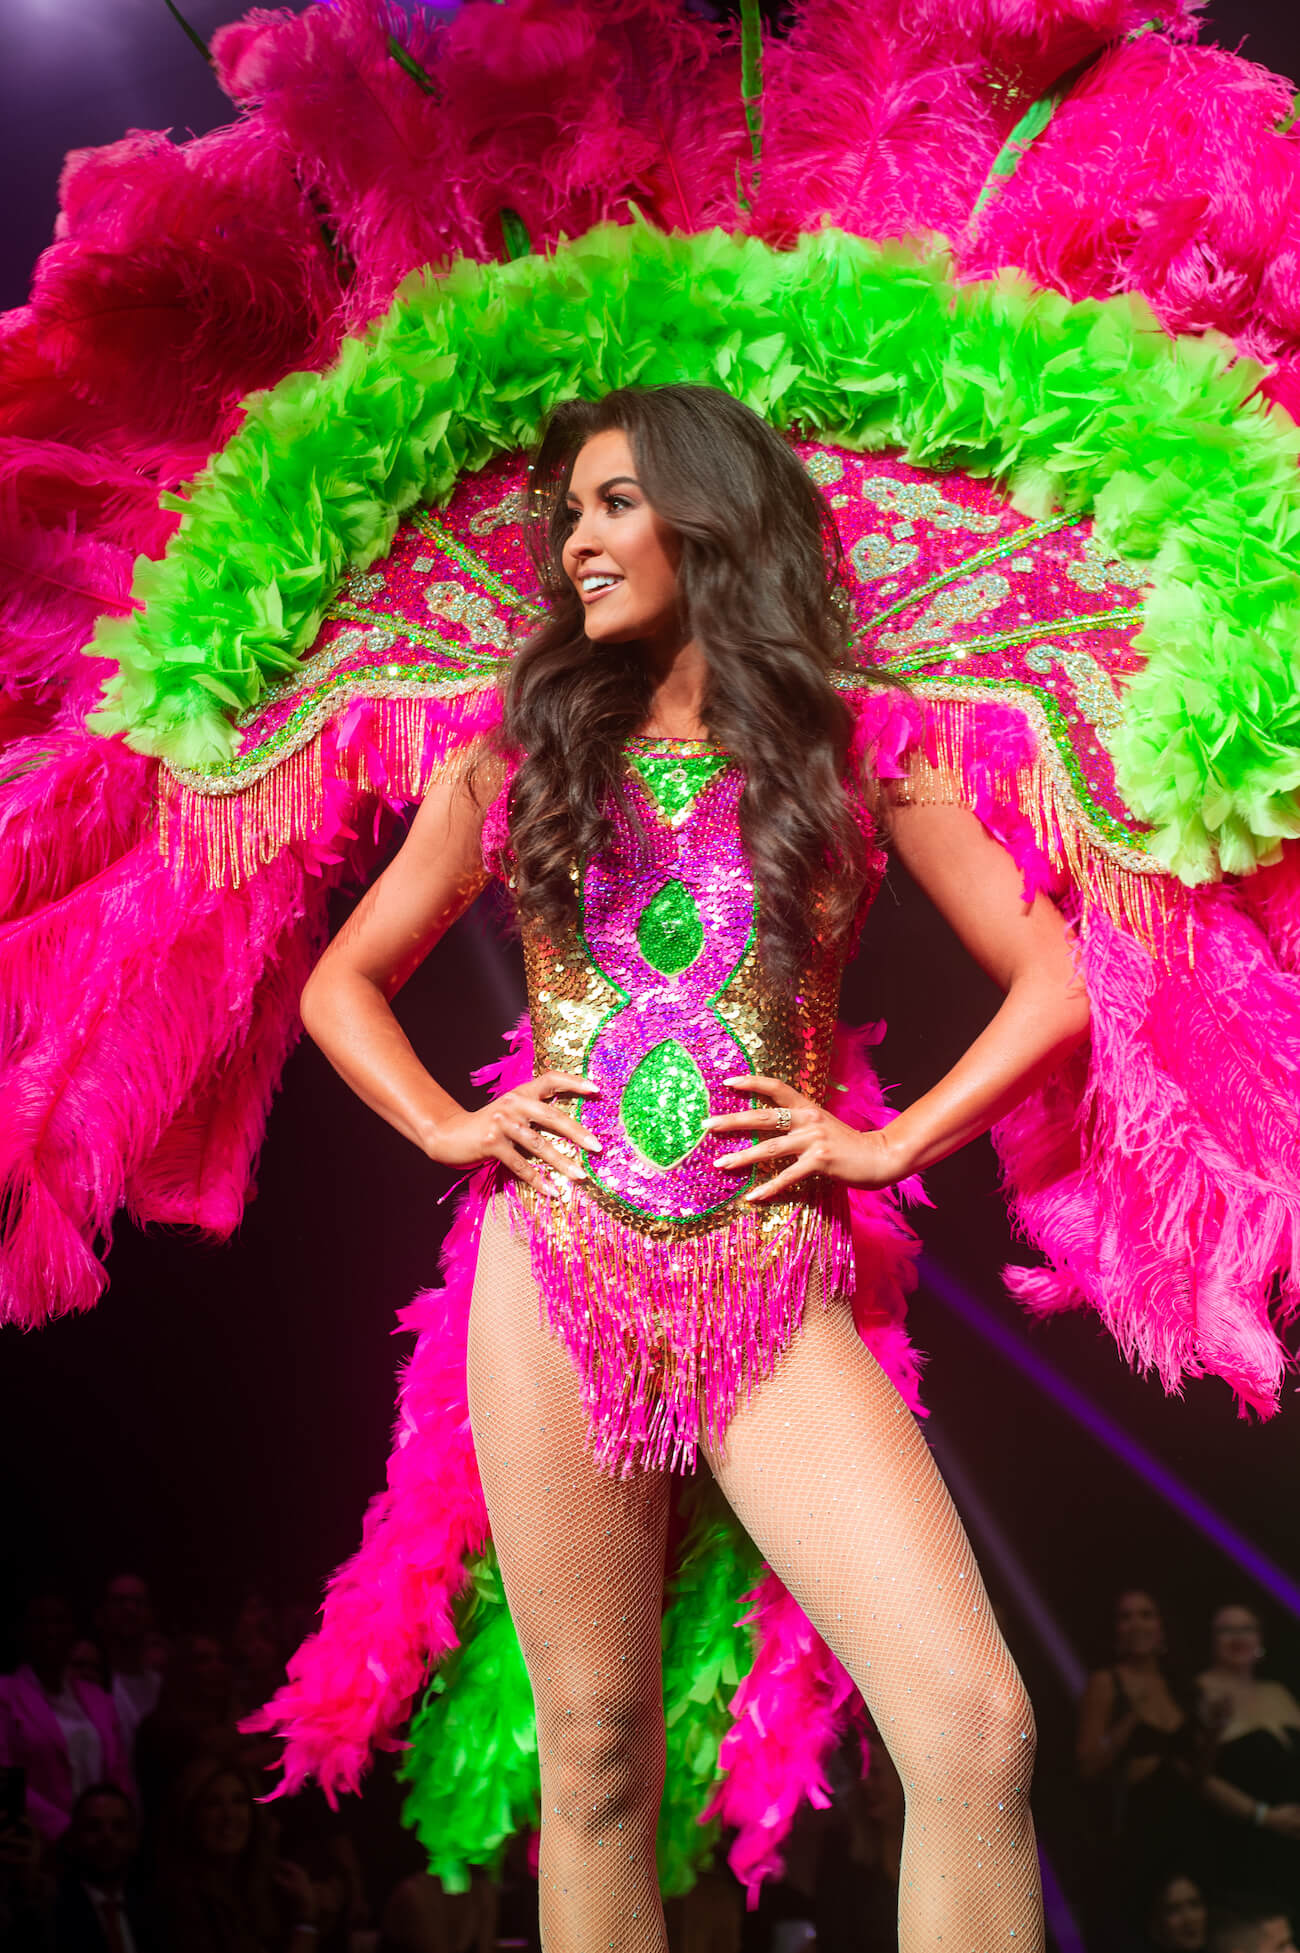 The Most Daring State Costumes From This Year's Miss USA Pageant